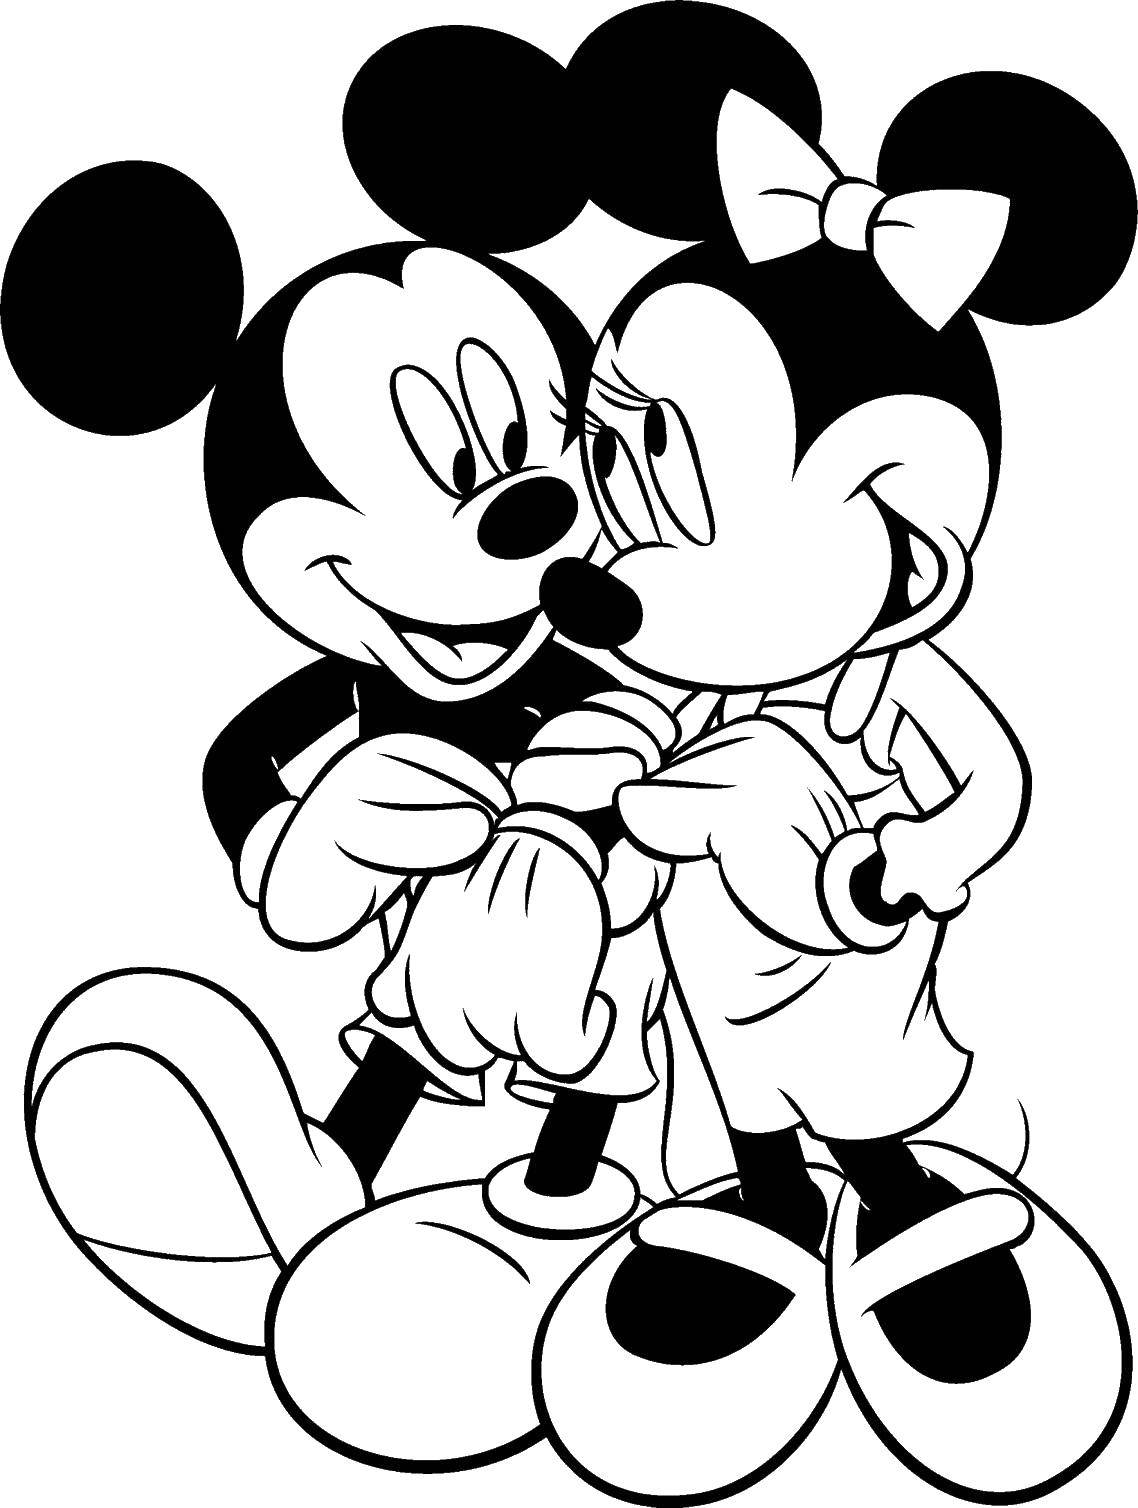 Coloring Mickey and Minnie mouse. Category Disney cartoons. Tags:  Disney, Mickey Mouse, Minnie Mouse.